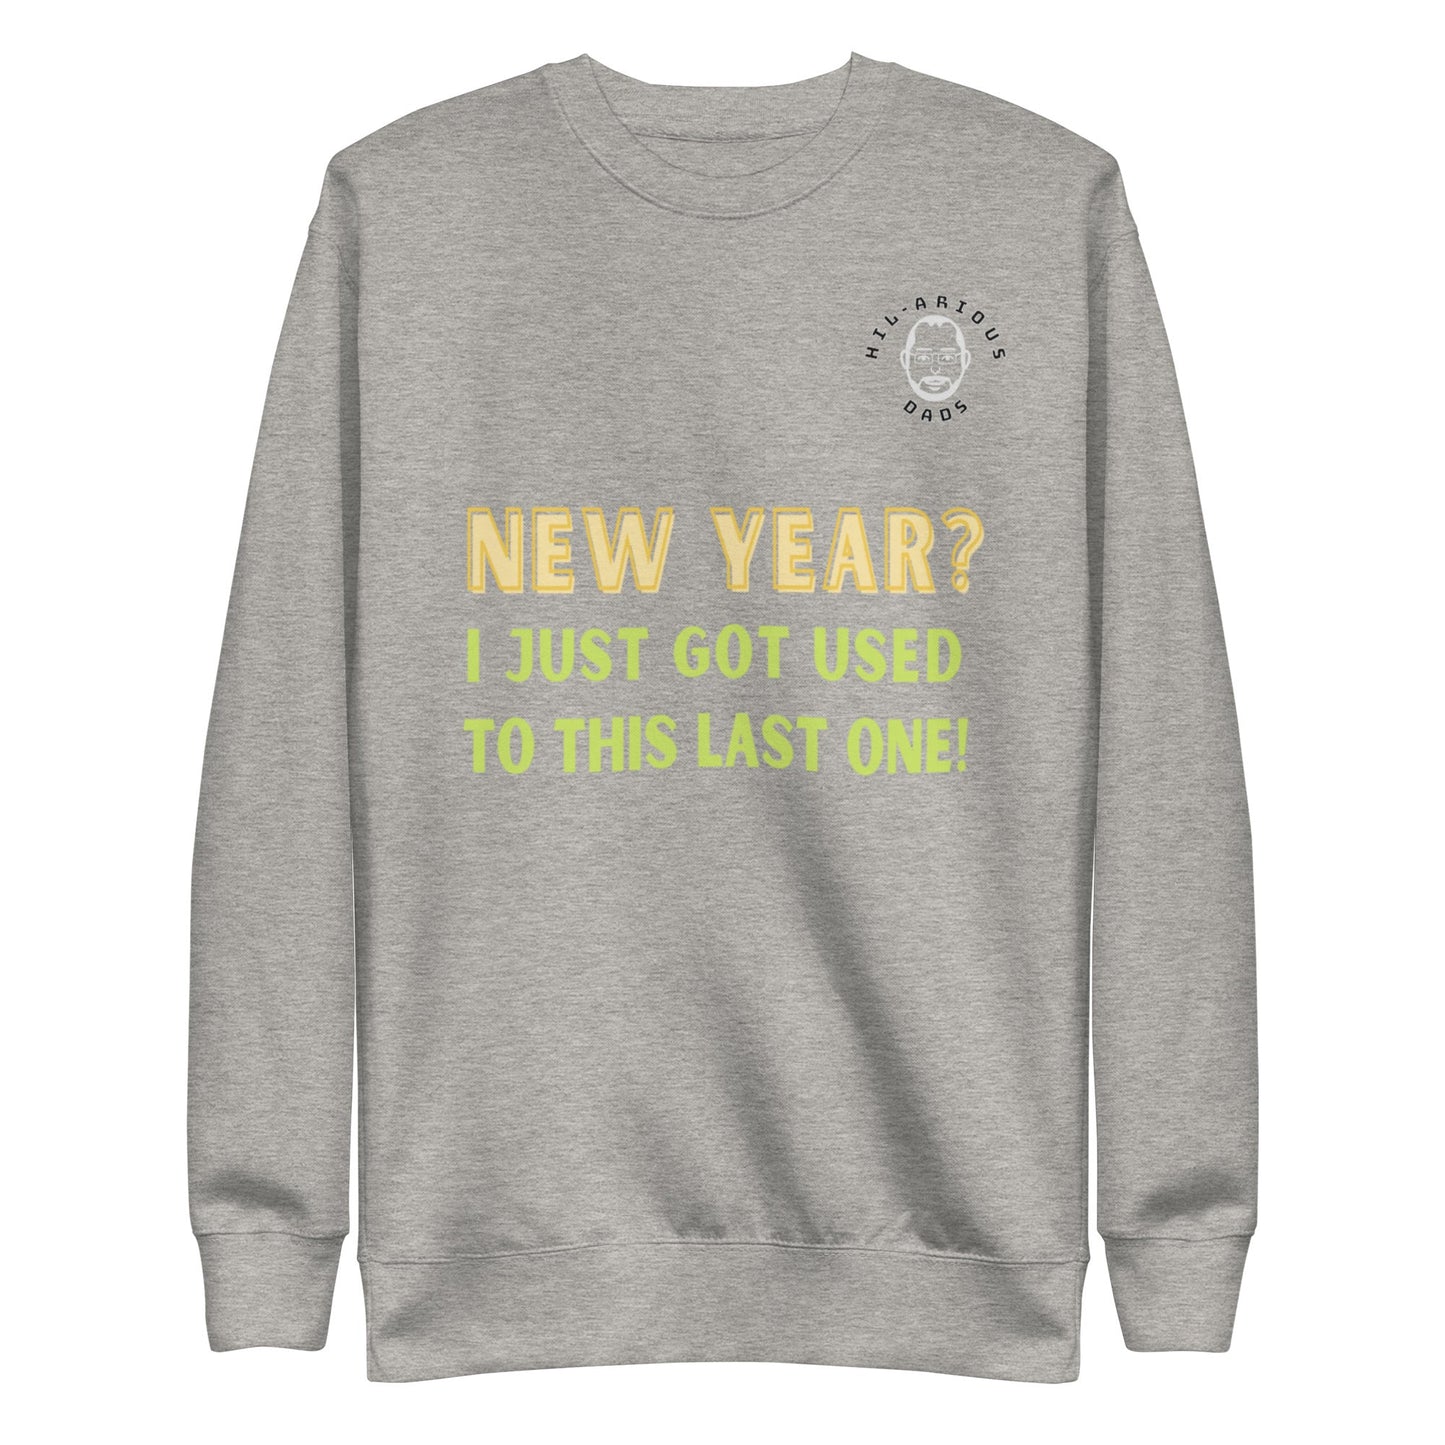 New Year? I just got used to this last one!-Sweatshirt - Hil-arious Dads